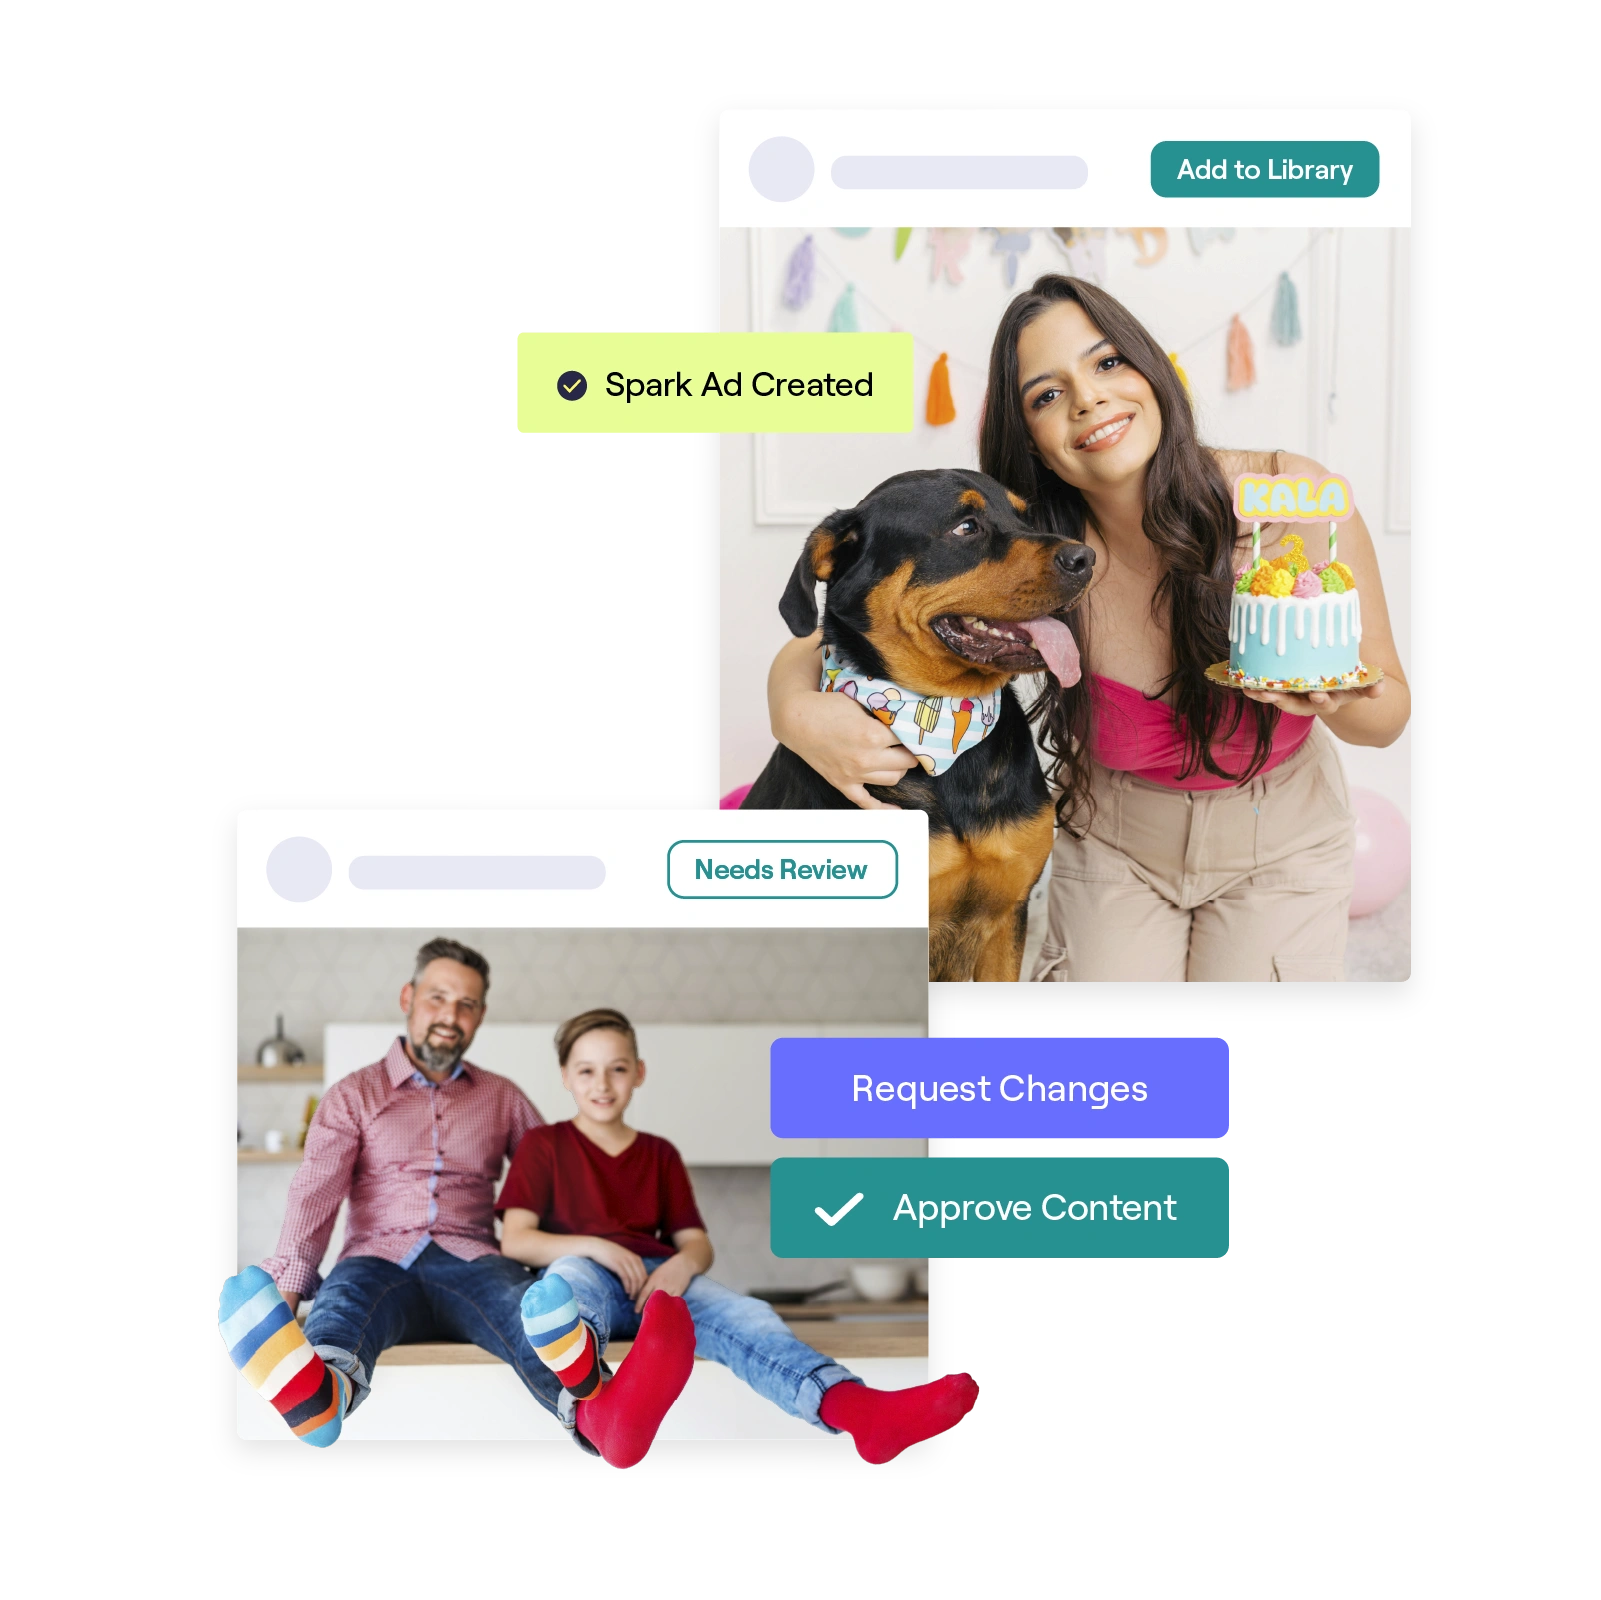 Stylized image of a content creator with a dog and another with a child